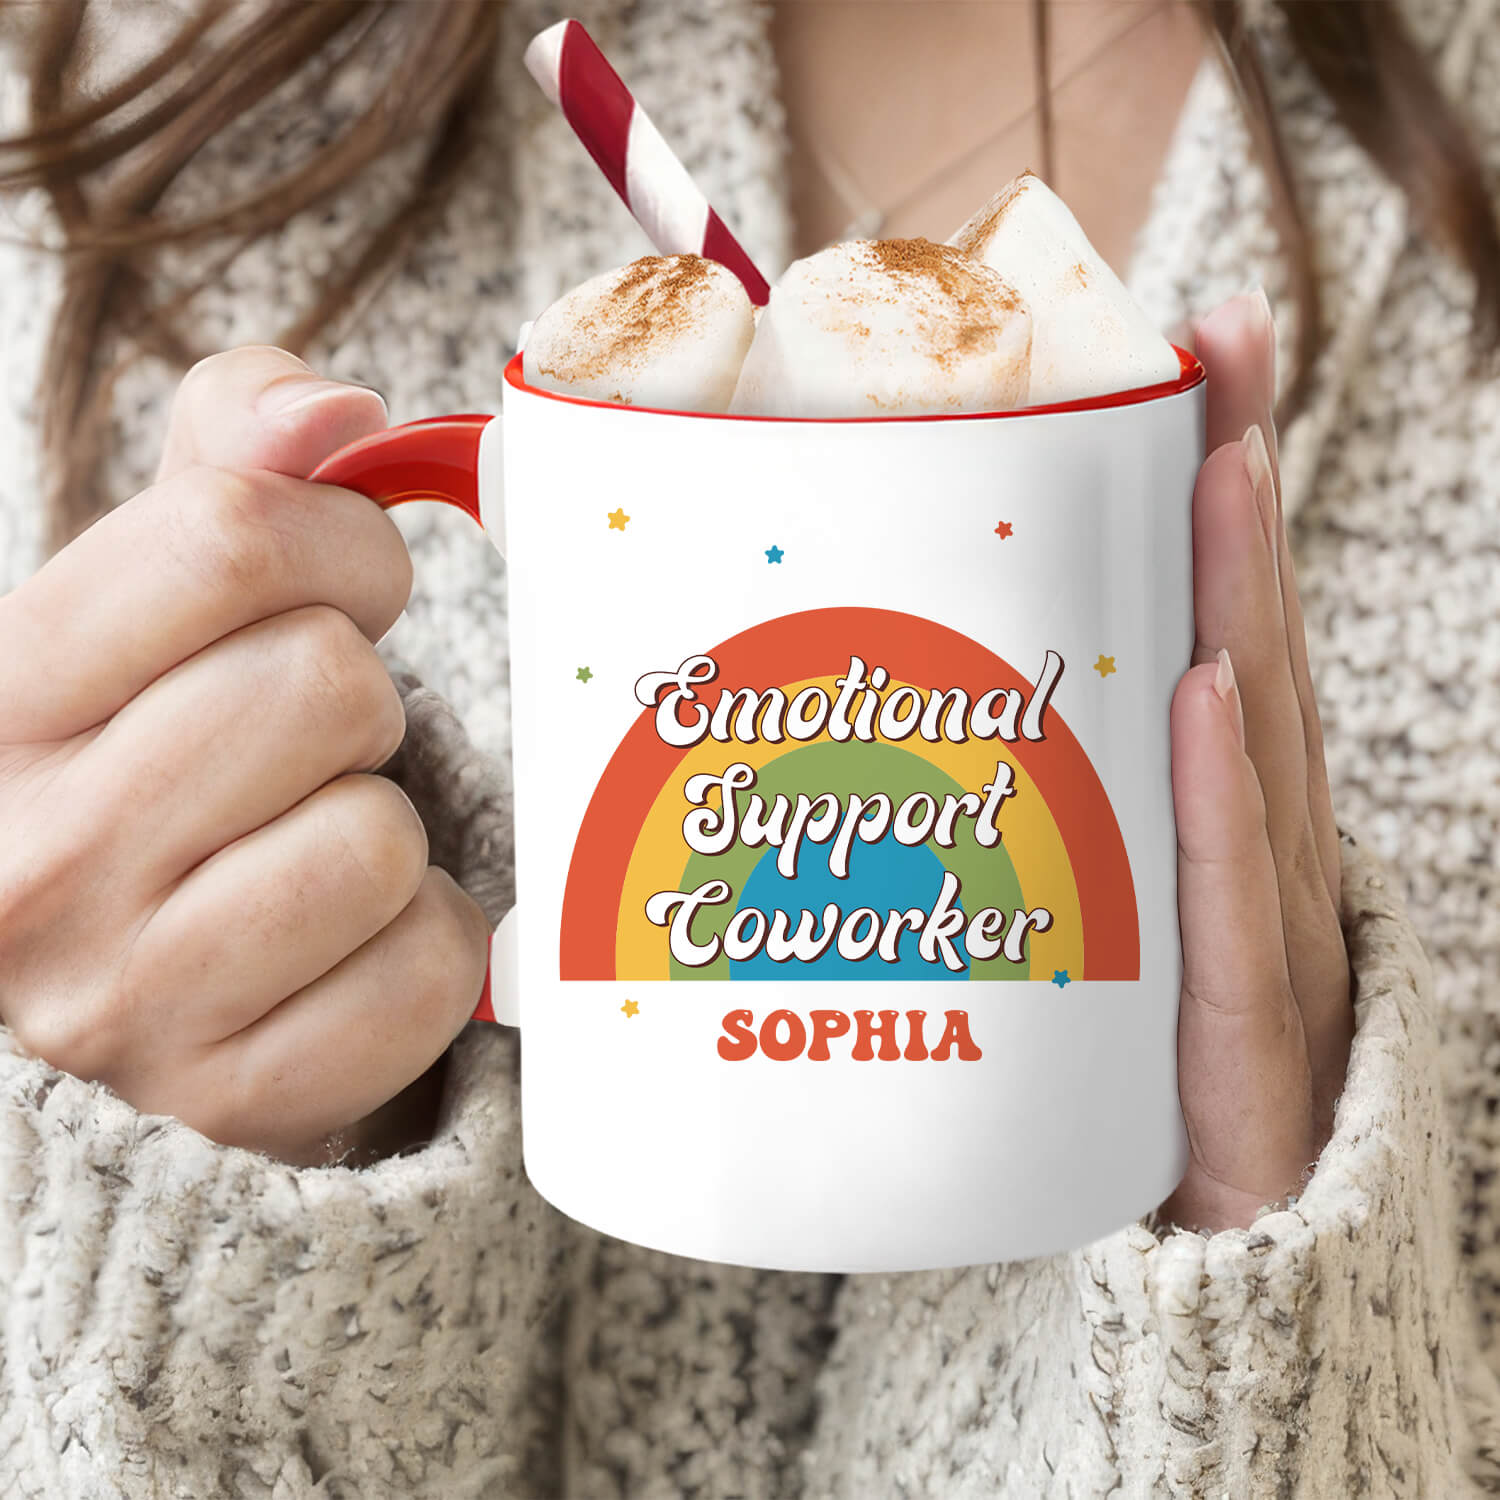 Emotional Support Coworker - Personalized Birthday or Christmas gift F – My  Mindful Gifts